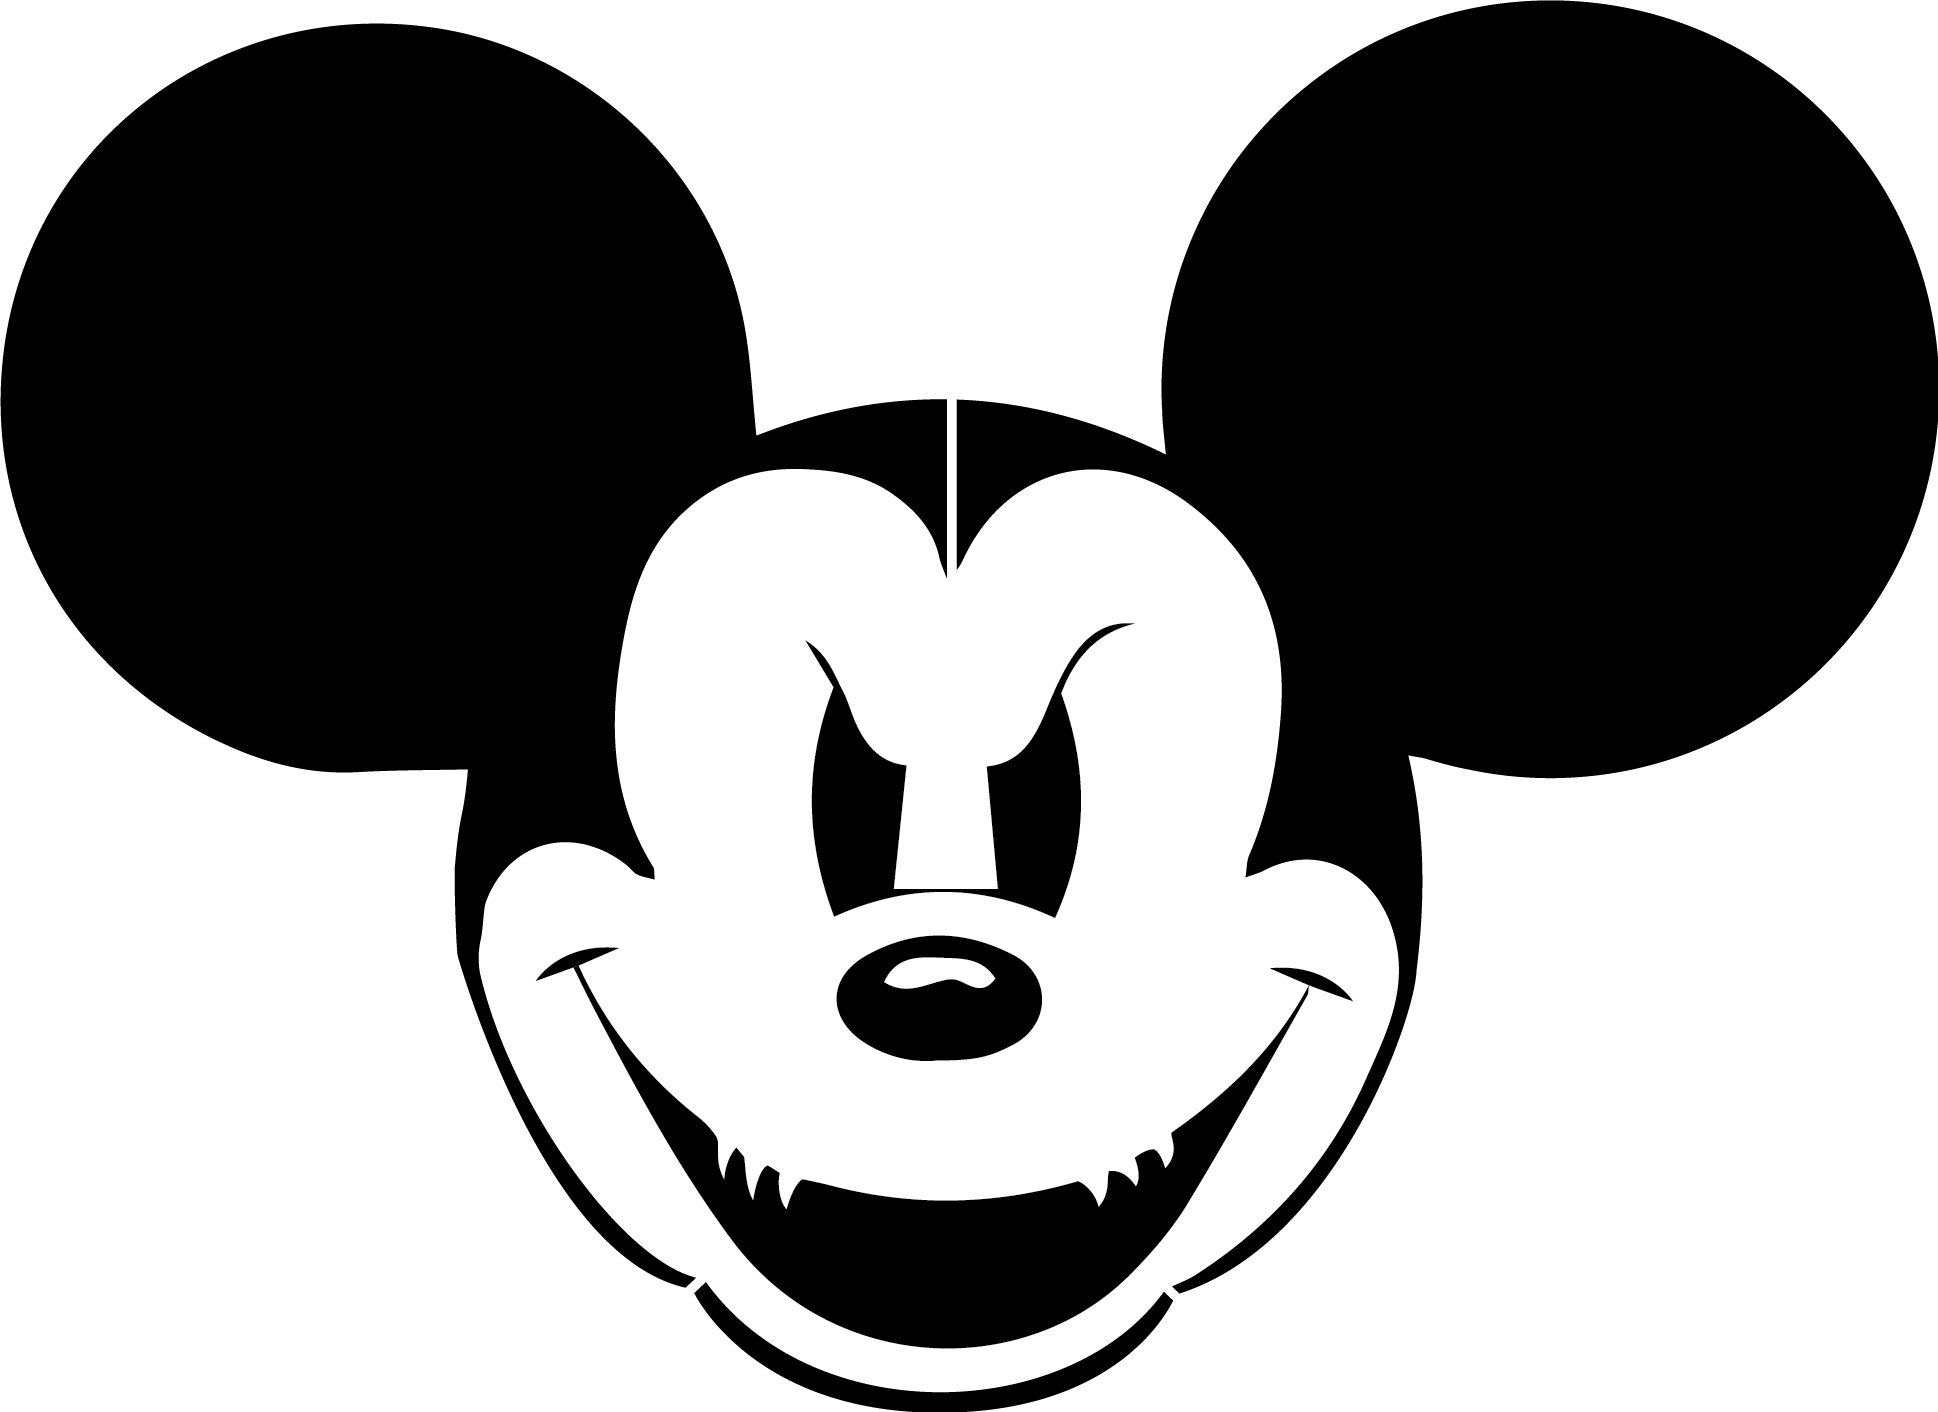 Download Mickey Mouse Silhouette Template at GetDrawings.com | Free ...